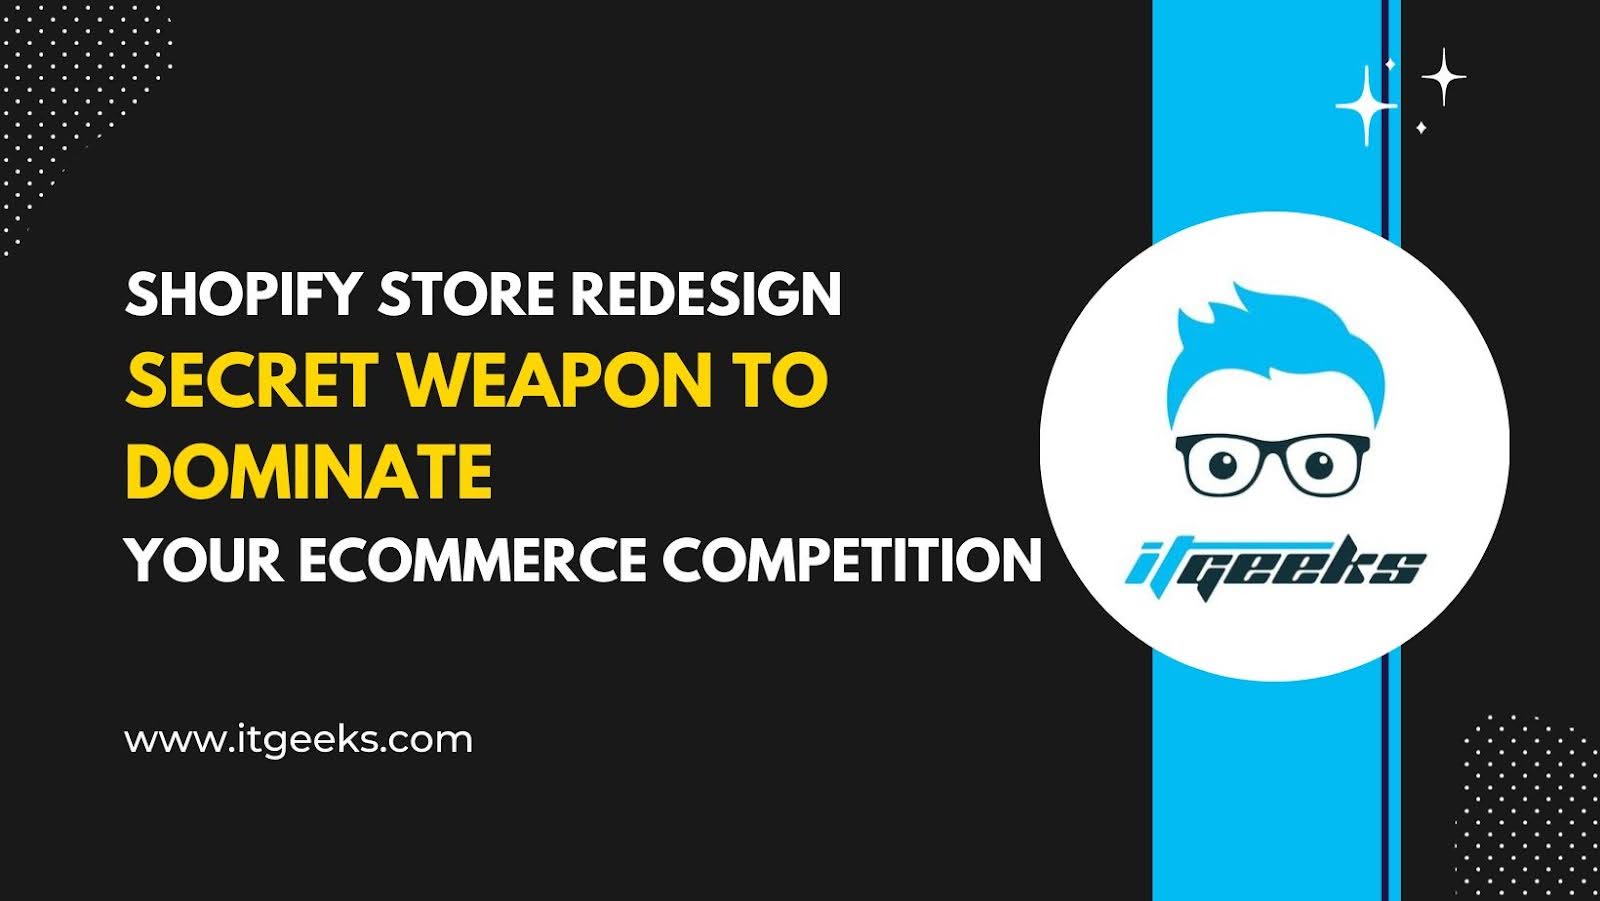 Shopify Store Redesign: Your Secret Weapon to Dominate Your eCommerce Competition